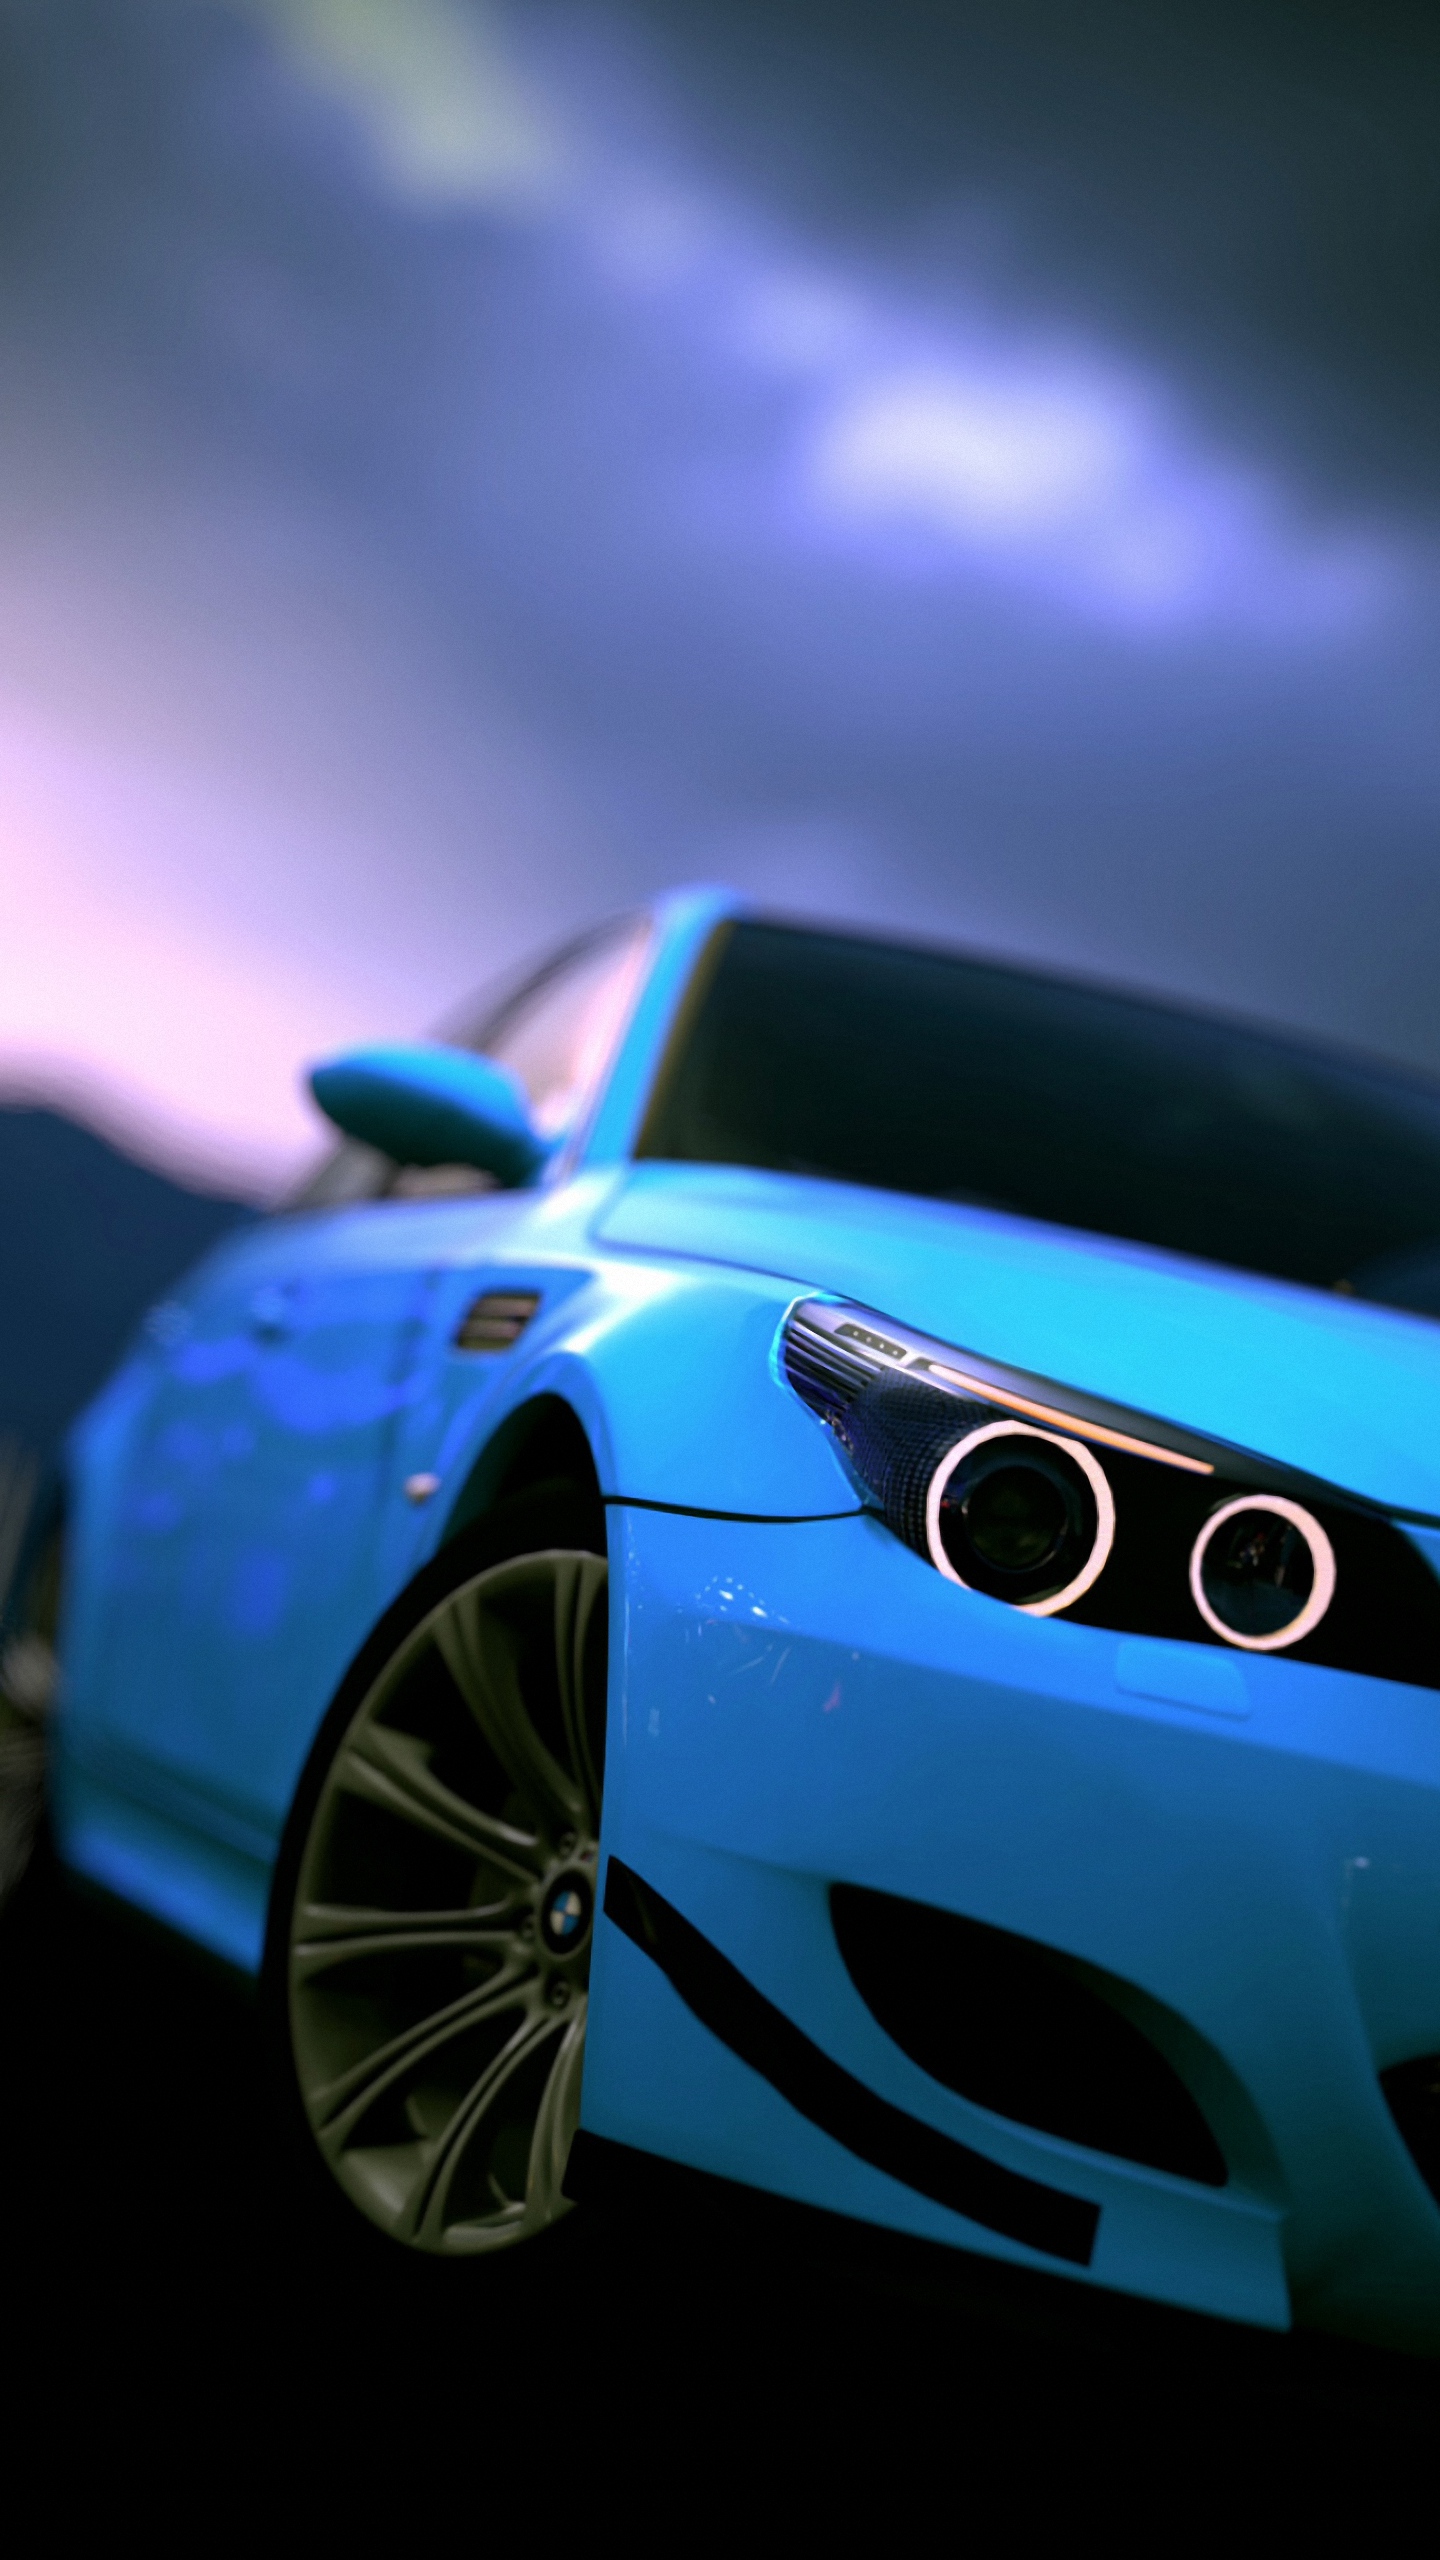 Baby Blue Bmw lg g3 Wallpapers HD 1440x2560